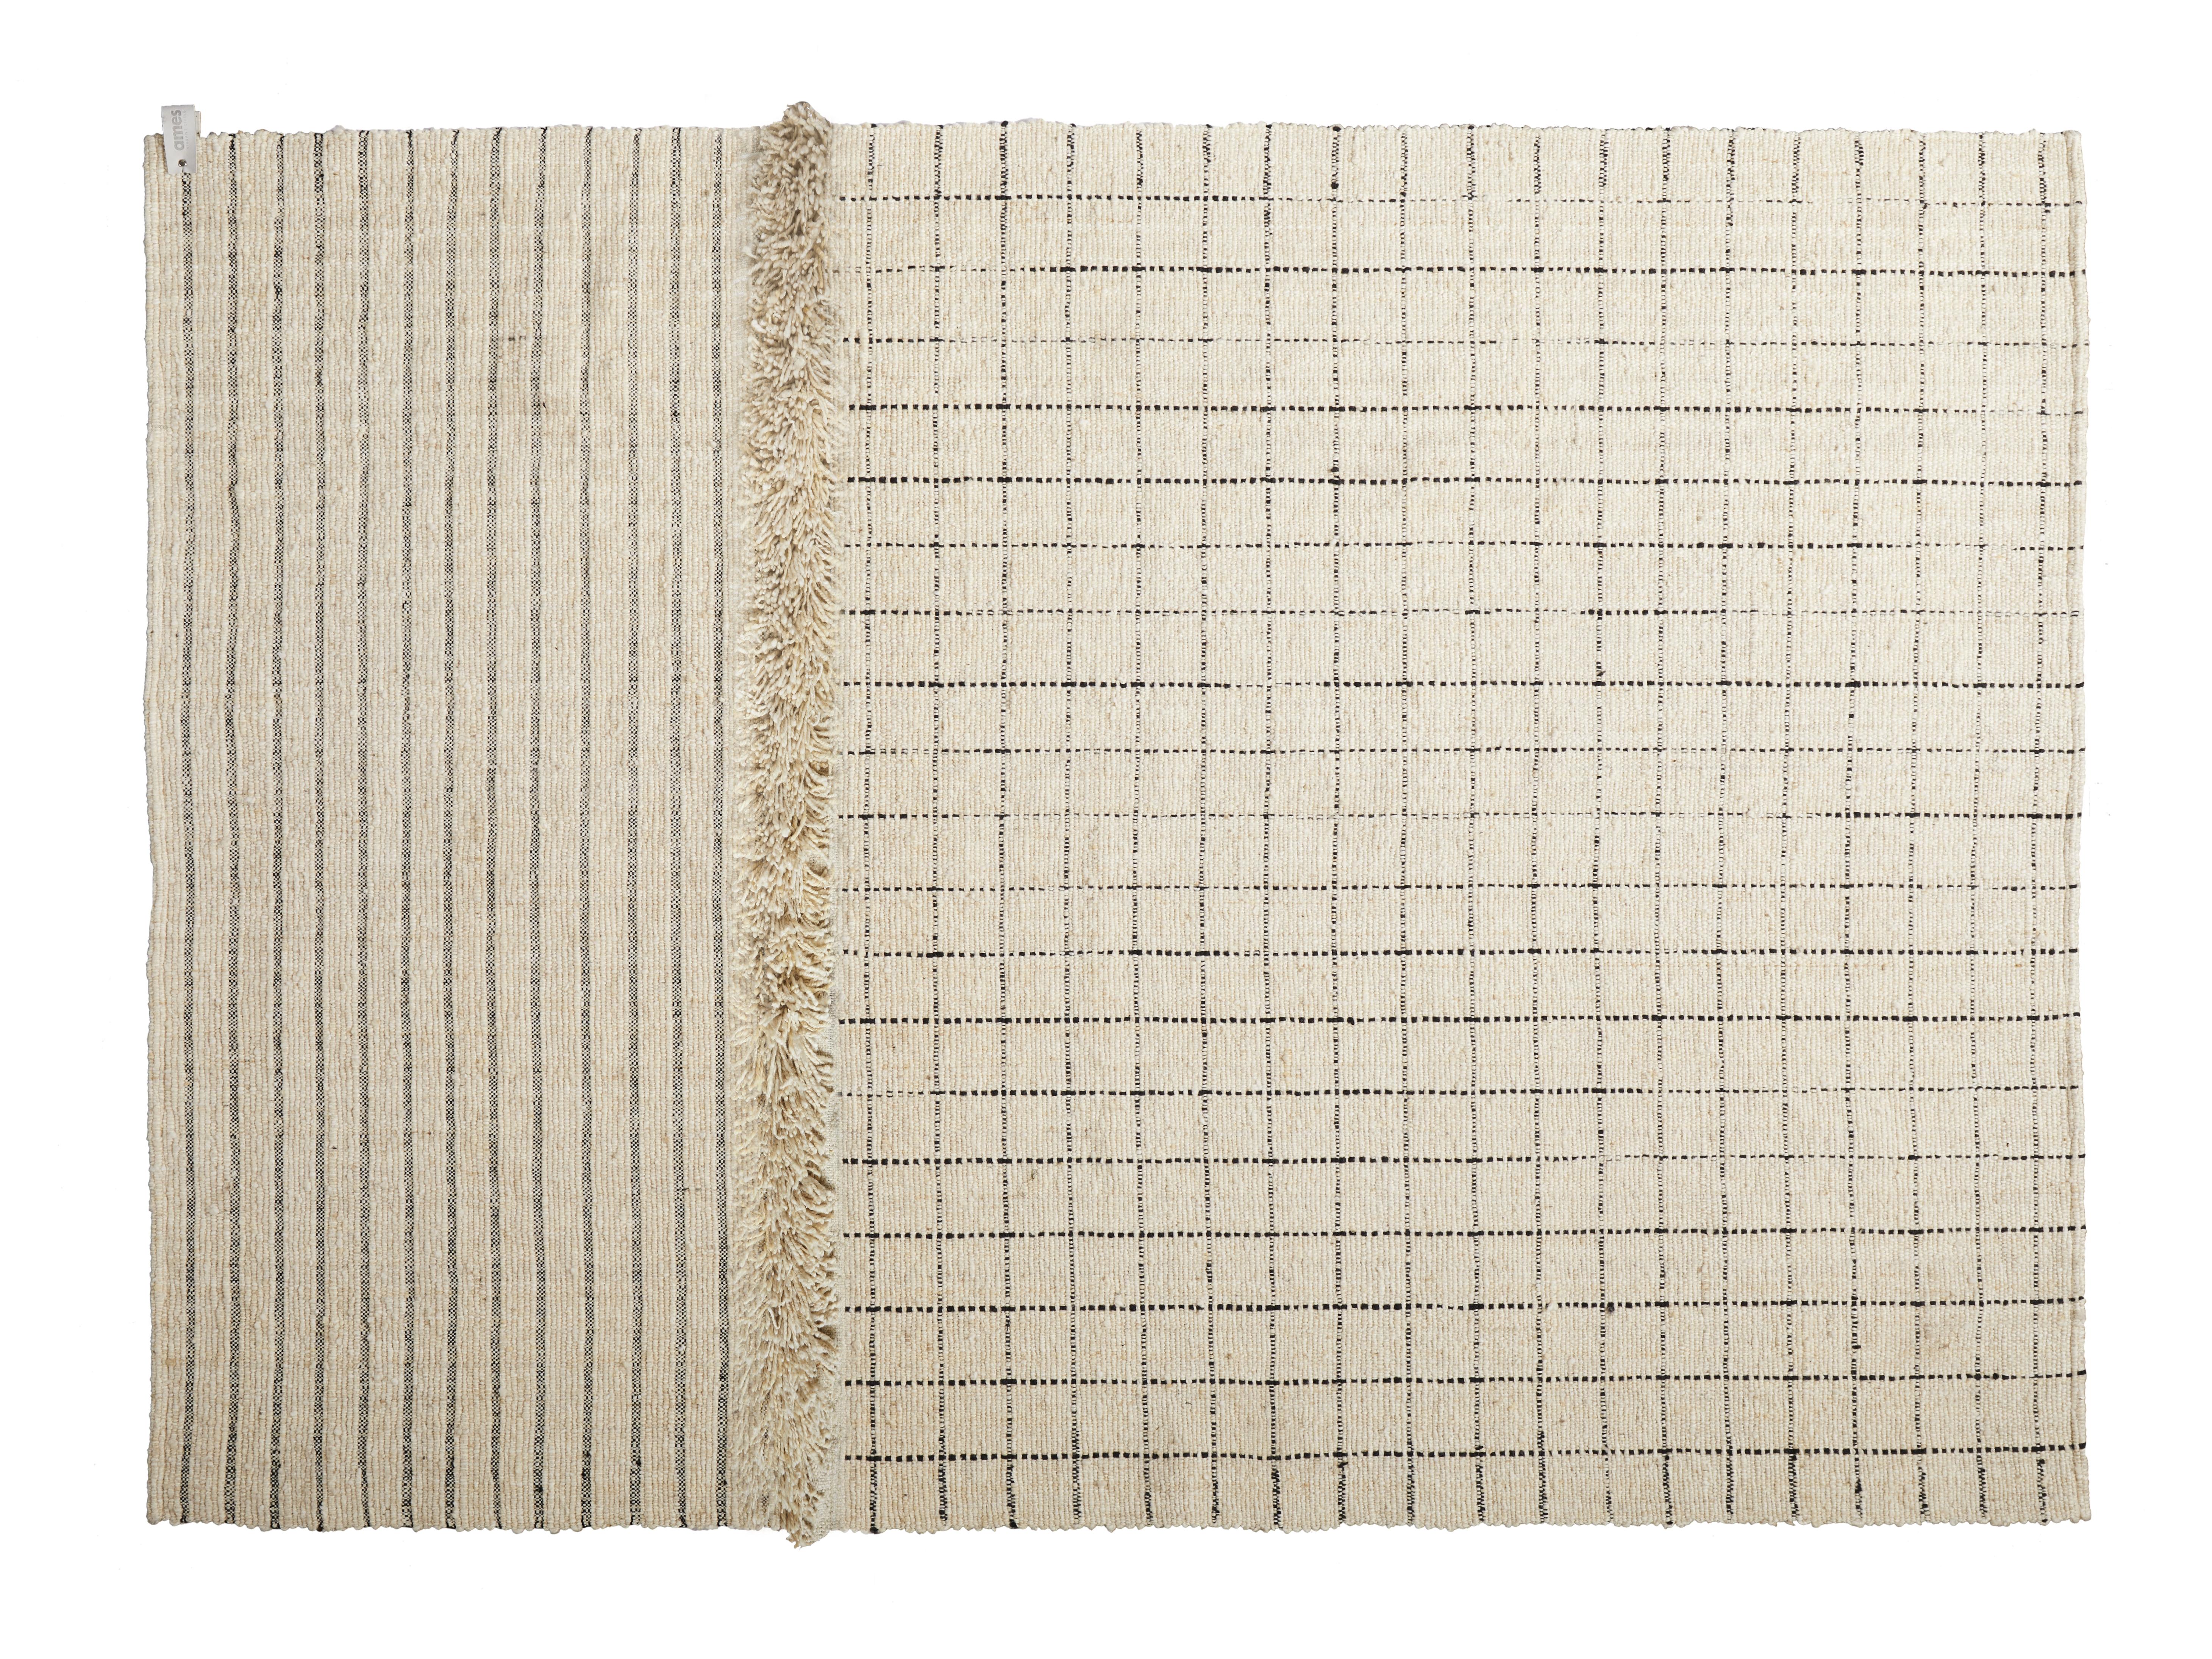 Karo medium Subas rug by Sebastian Herkner
Materials: 100% natural virgin wool. 
Technique: Naturally dyed fibers. Hand-woven in Colombia.
Dimensions: W 200 x L 300 cm 
Available in colors: karo, linea 1, linea 2, moton, oruga. 

The Subas